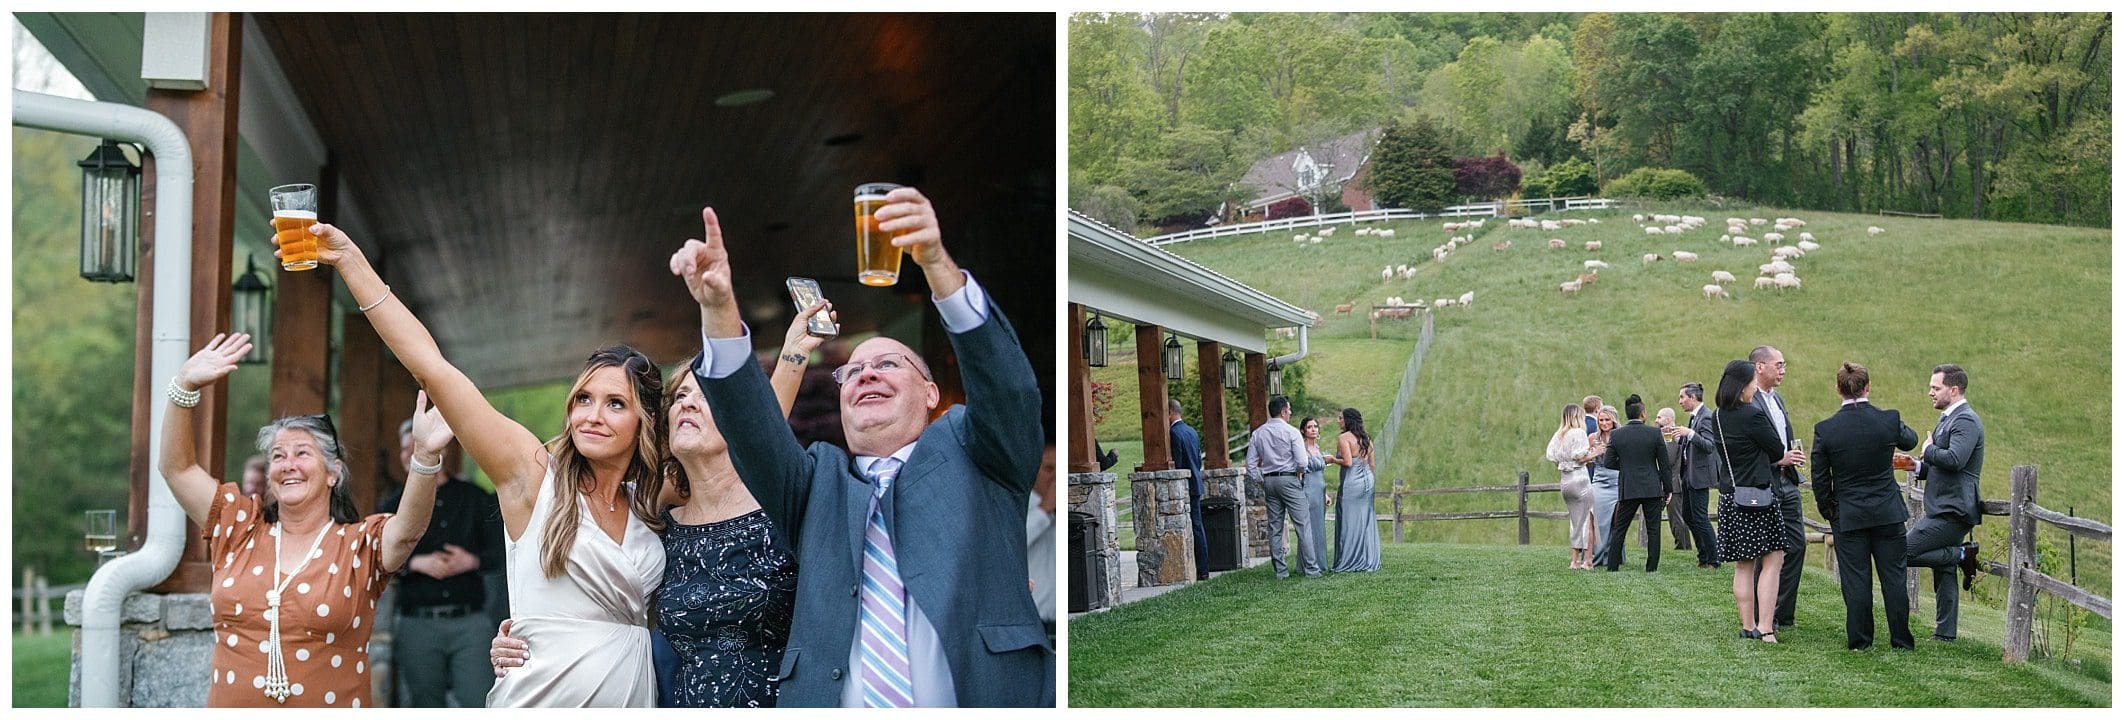 guests having fun for a spring destination wedding in Asheville